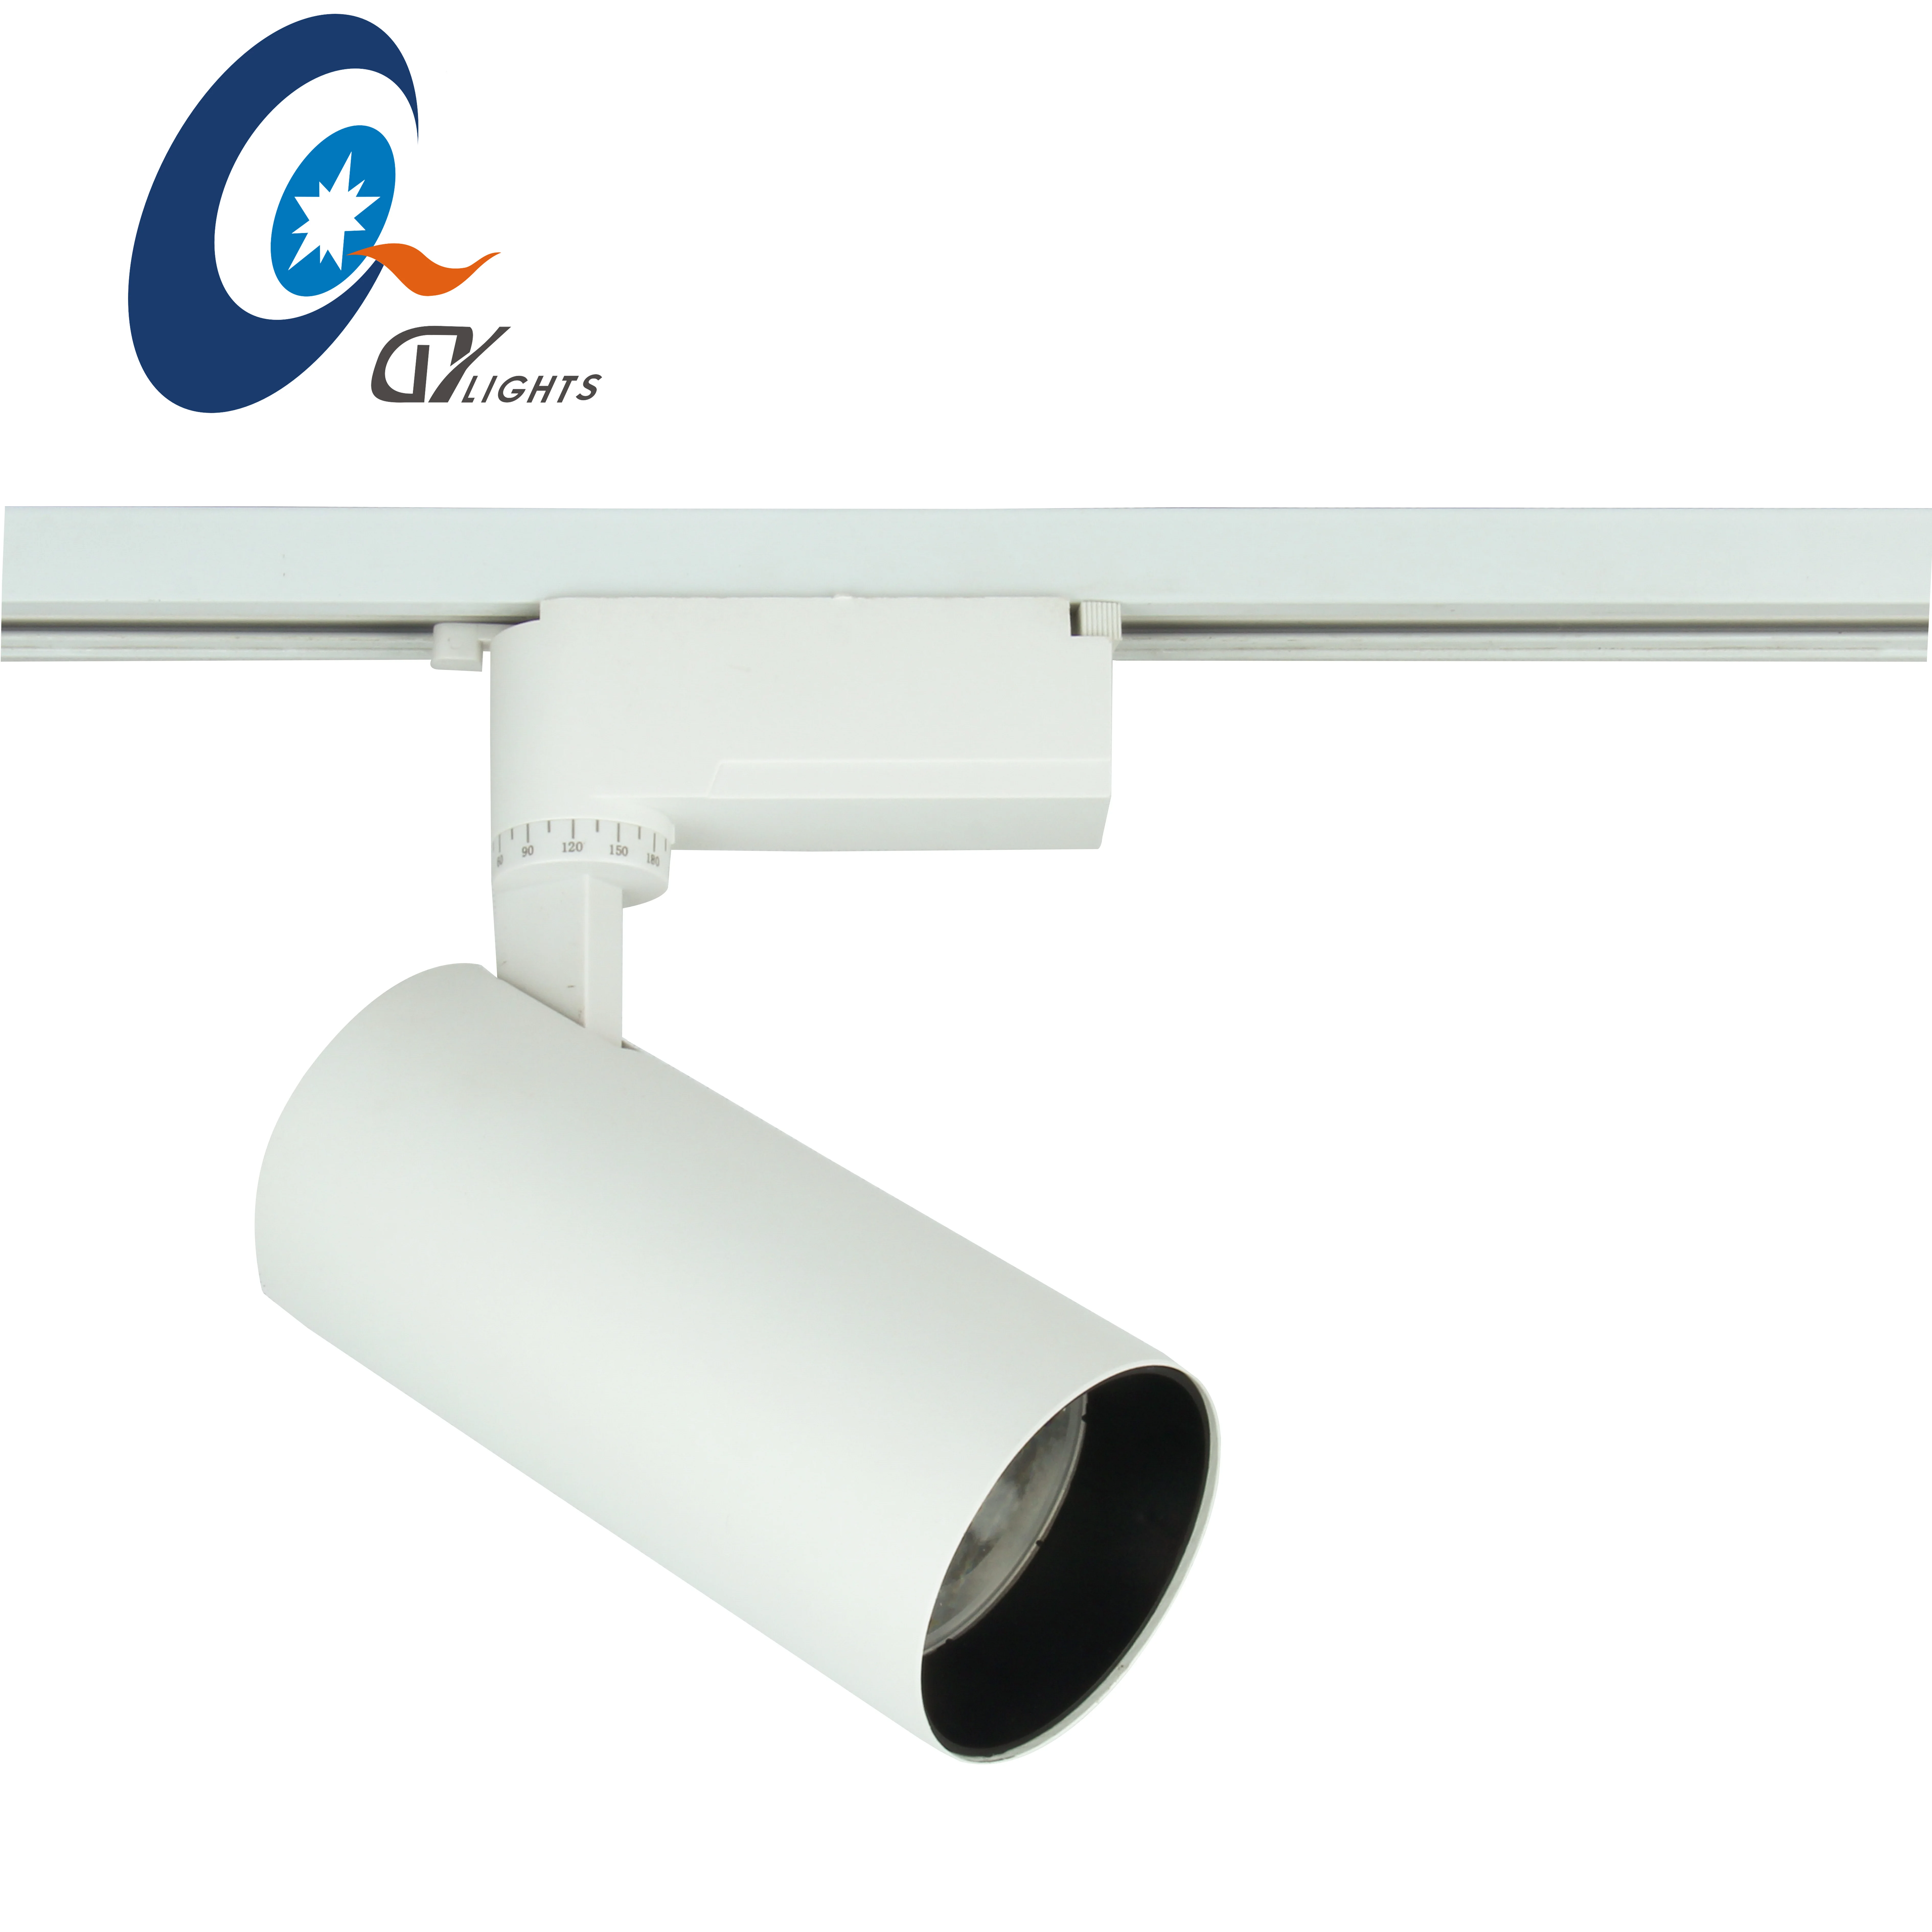 China Supplier High Quality Commercial Lighting 20W 30W Cob Led Track Light